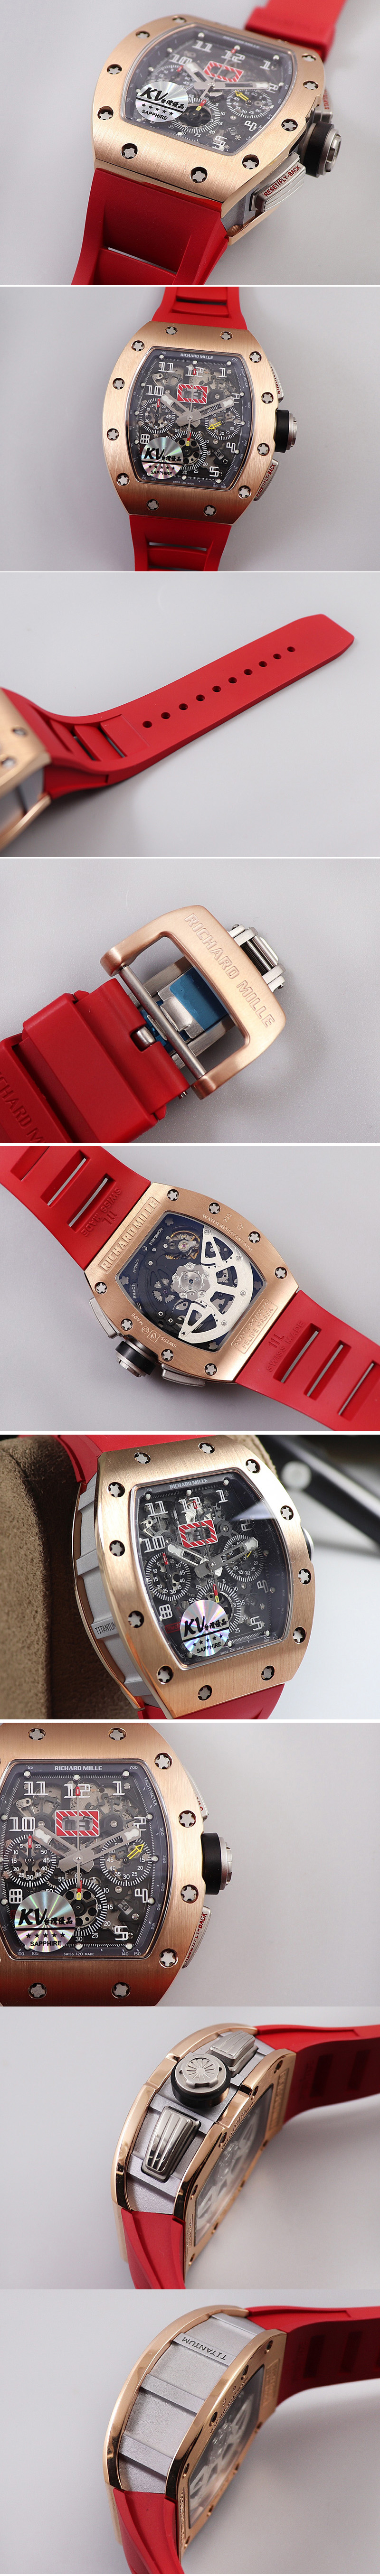 Replica Richard Mille RM011 RG Chrono KVF 1:1 Best Edition Crystal Dial Black on Red Rubber Strap A7750 V3